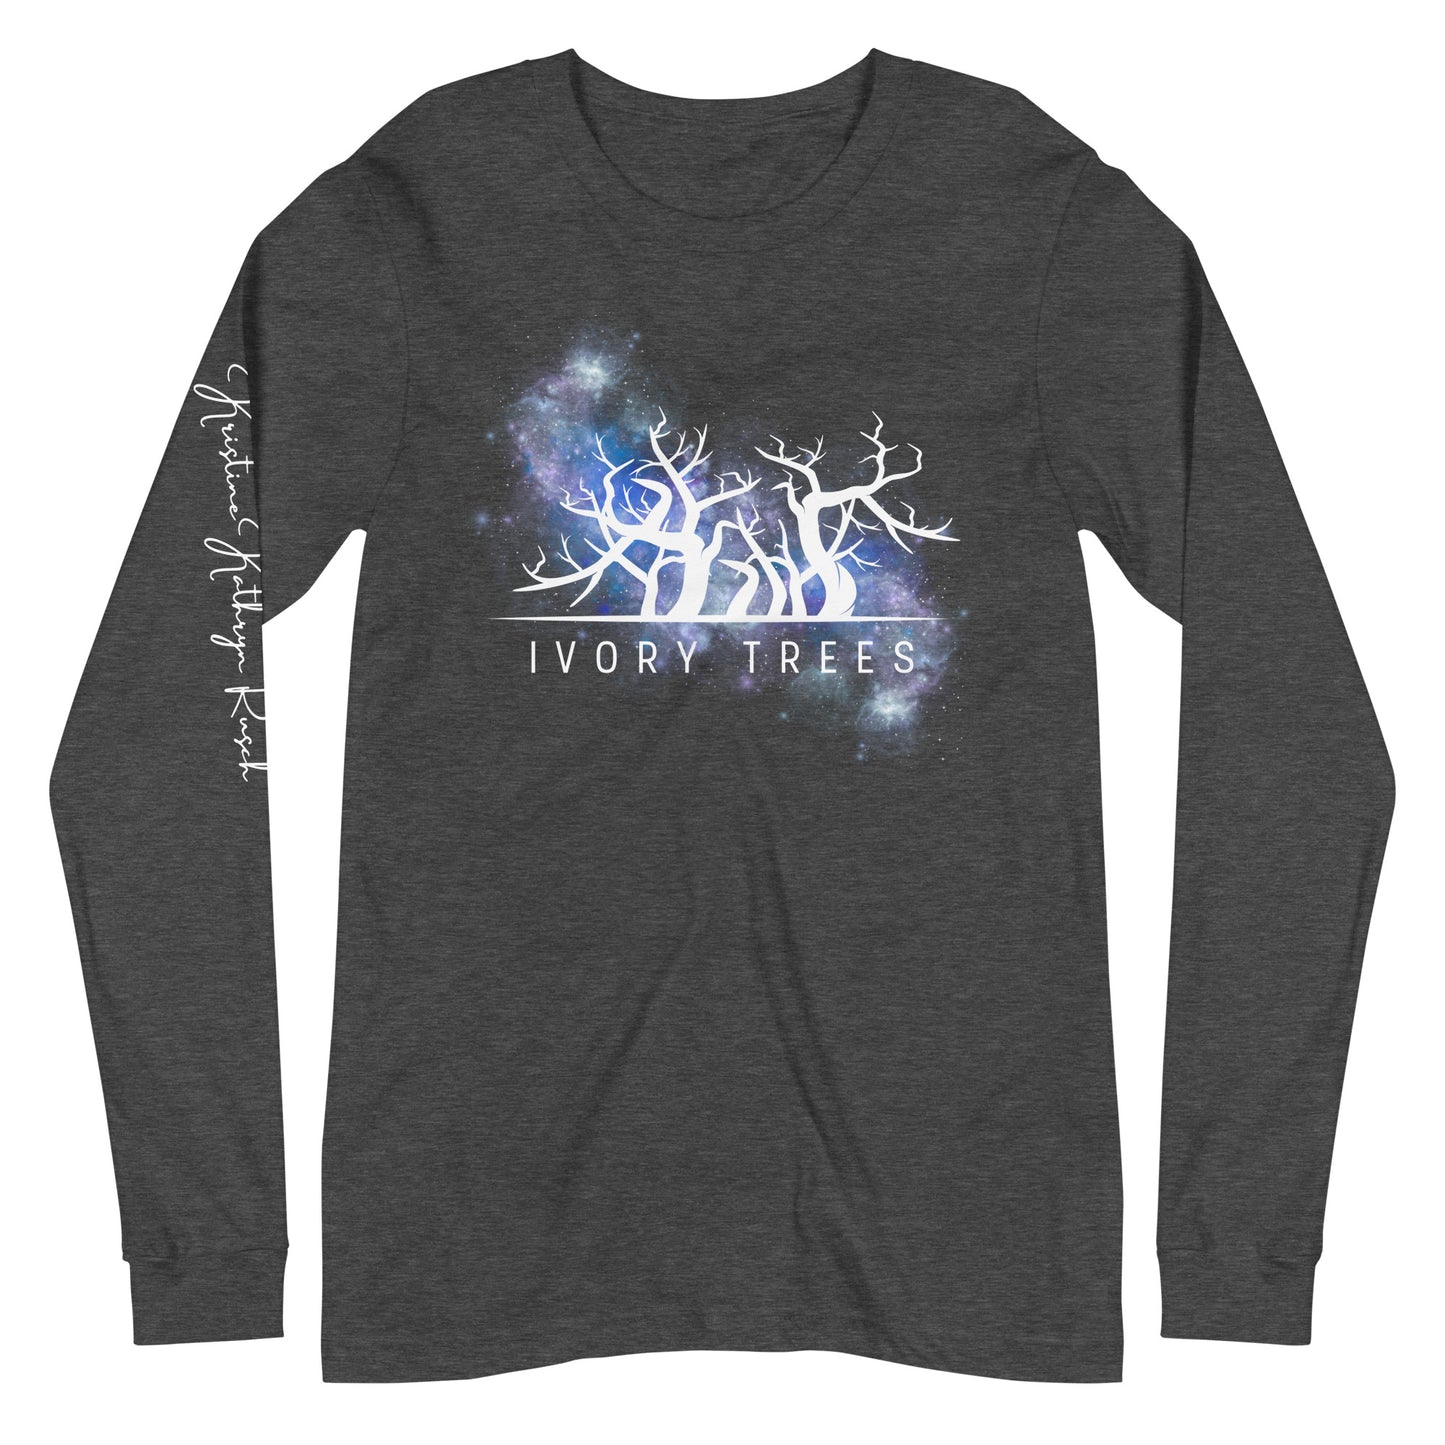 IVORY TREES NEBULA L/S Tee - The Diving Universe by Kristine Kathryn Rusch